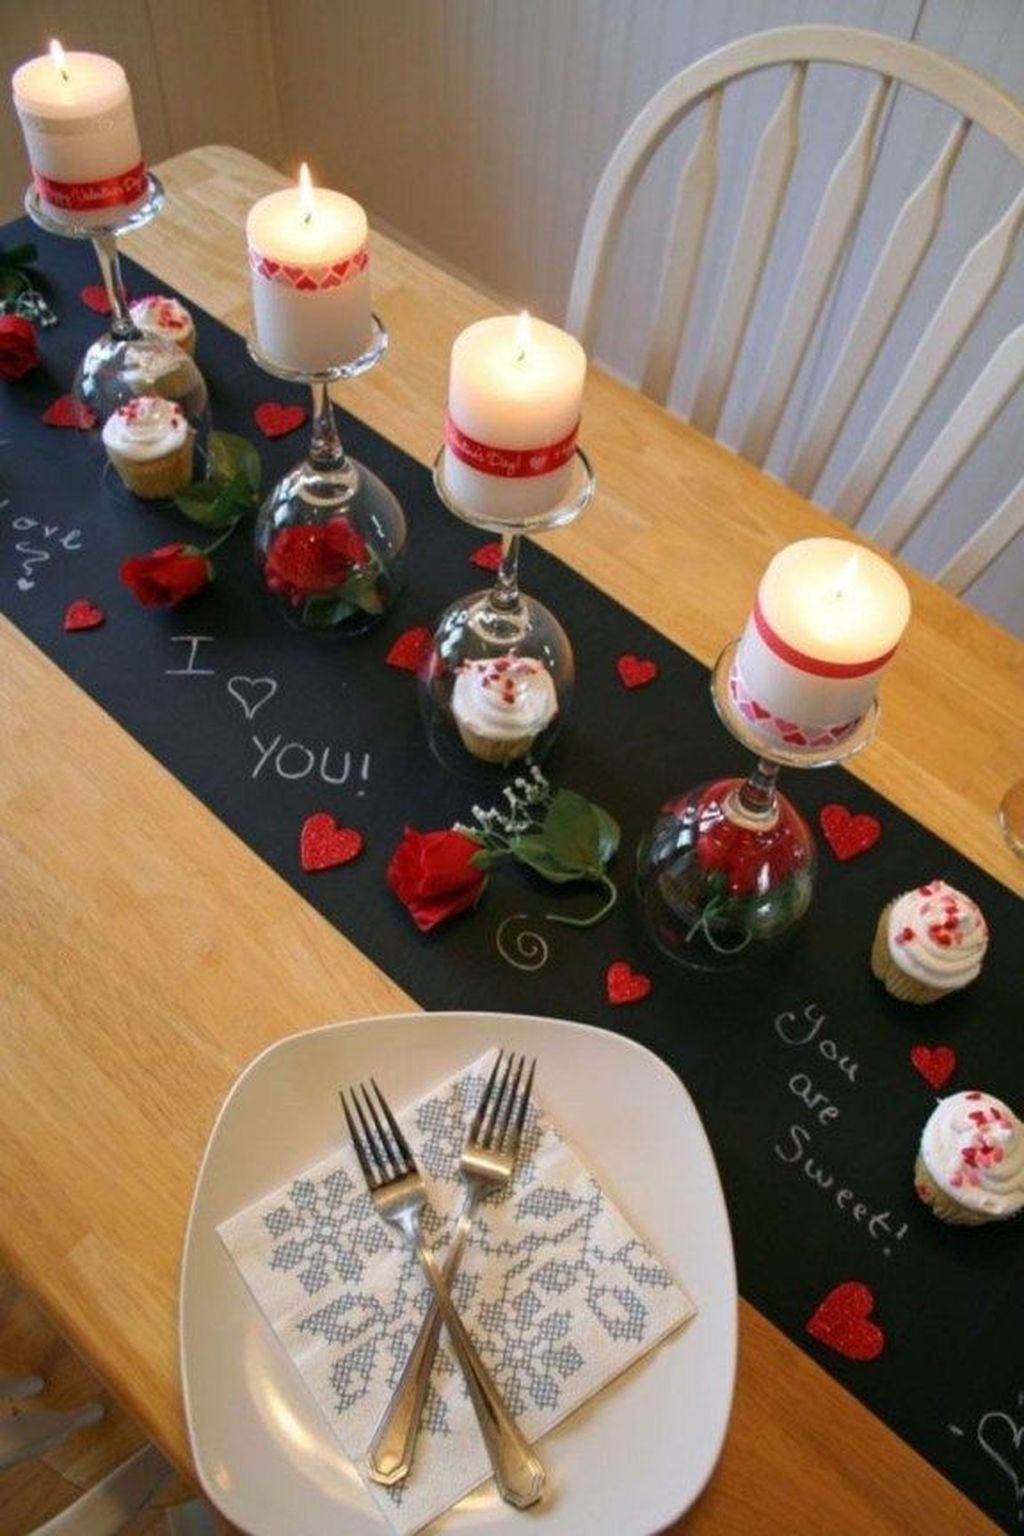 Most Inspiring Valentine’s Day Simple Table Decoration Ideas 23